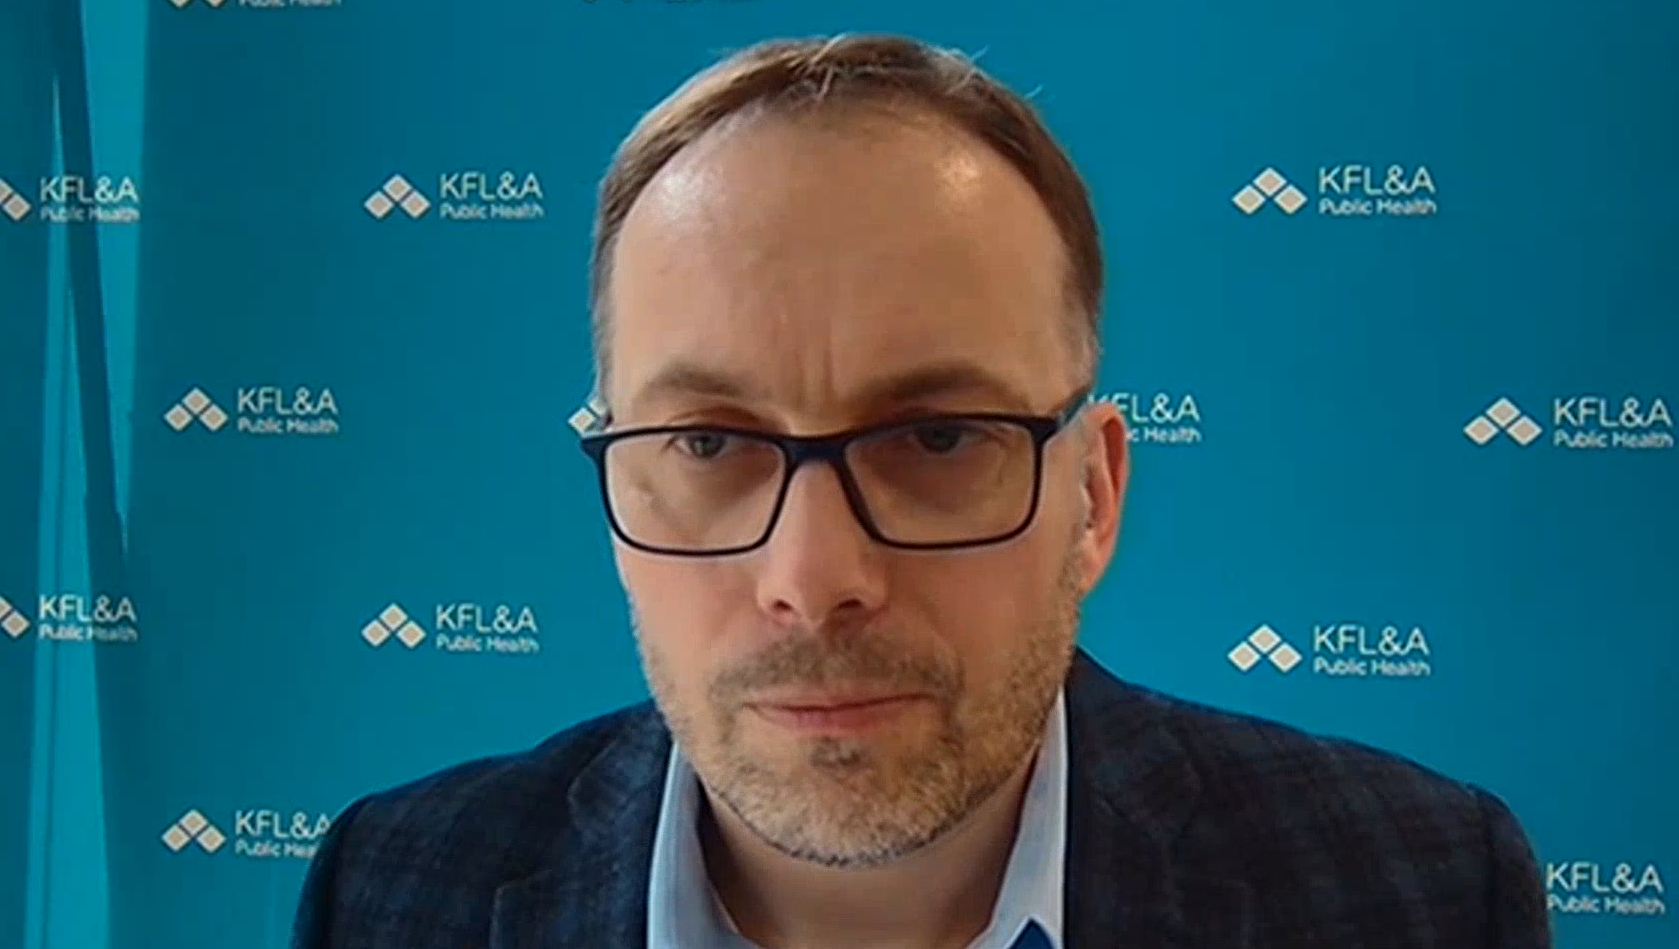 Dr. Piotr Oglaza says the KFL&A region is ready to live with COVID-19.